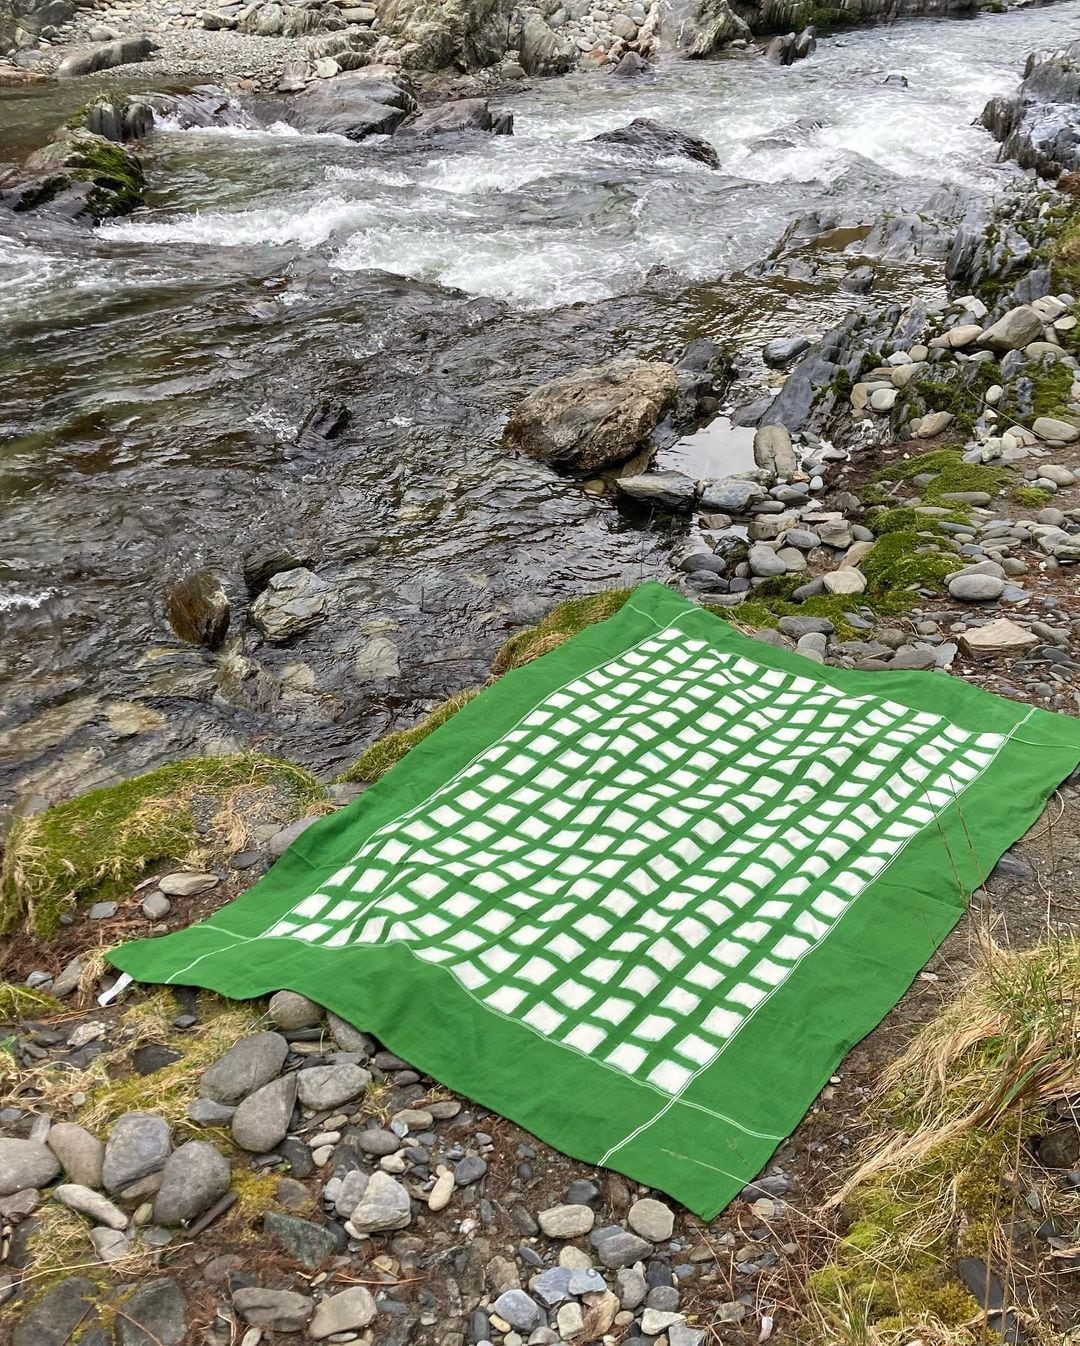 A Ikat Weave Tablecloth – Green Grid by Stitchwallah on the ground next to a river.